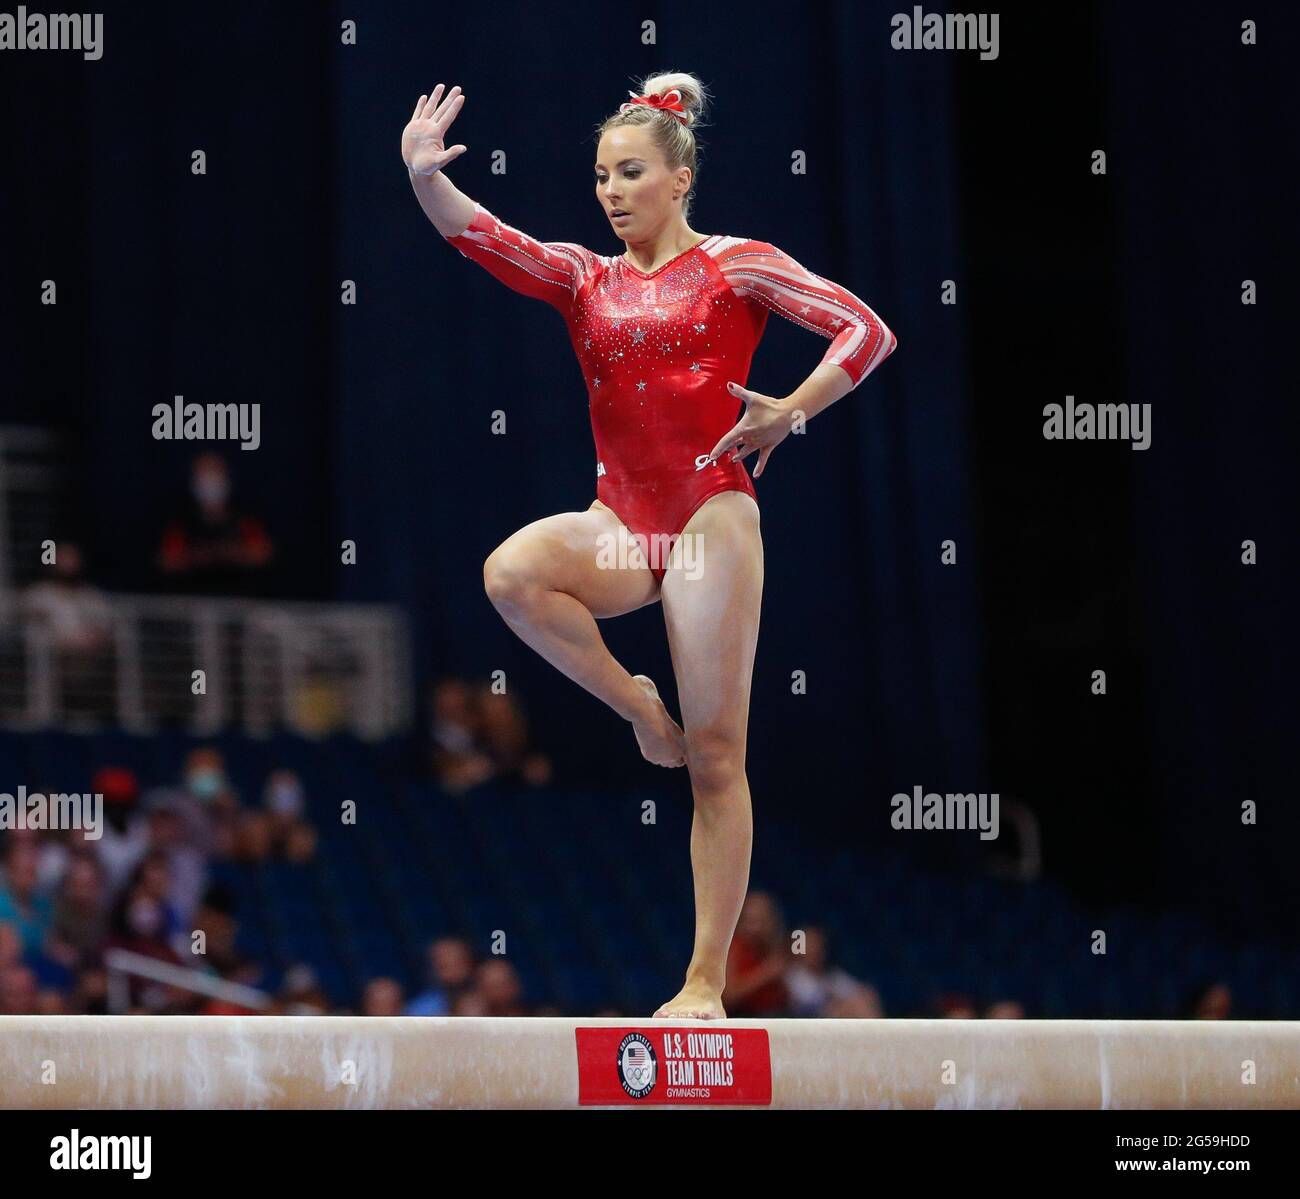 St Louis, USA. 25th June, 2021. June 25, 2021: Mykayla Skinner performs on the balance beam during Day 1 of the 2021 U.S. Women's Gymnastics Olympic Team Trials at the Dome at America's Center in St. Louis, MO. Kyle Okita/CSM Credit: Cal Sport Media/Alamy Live News Stock Photo